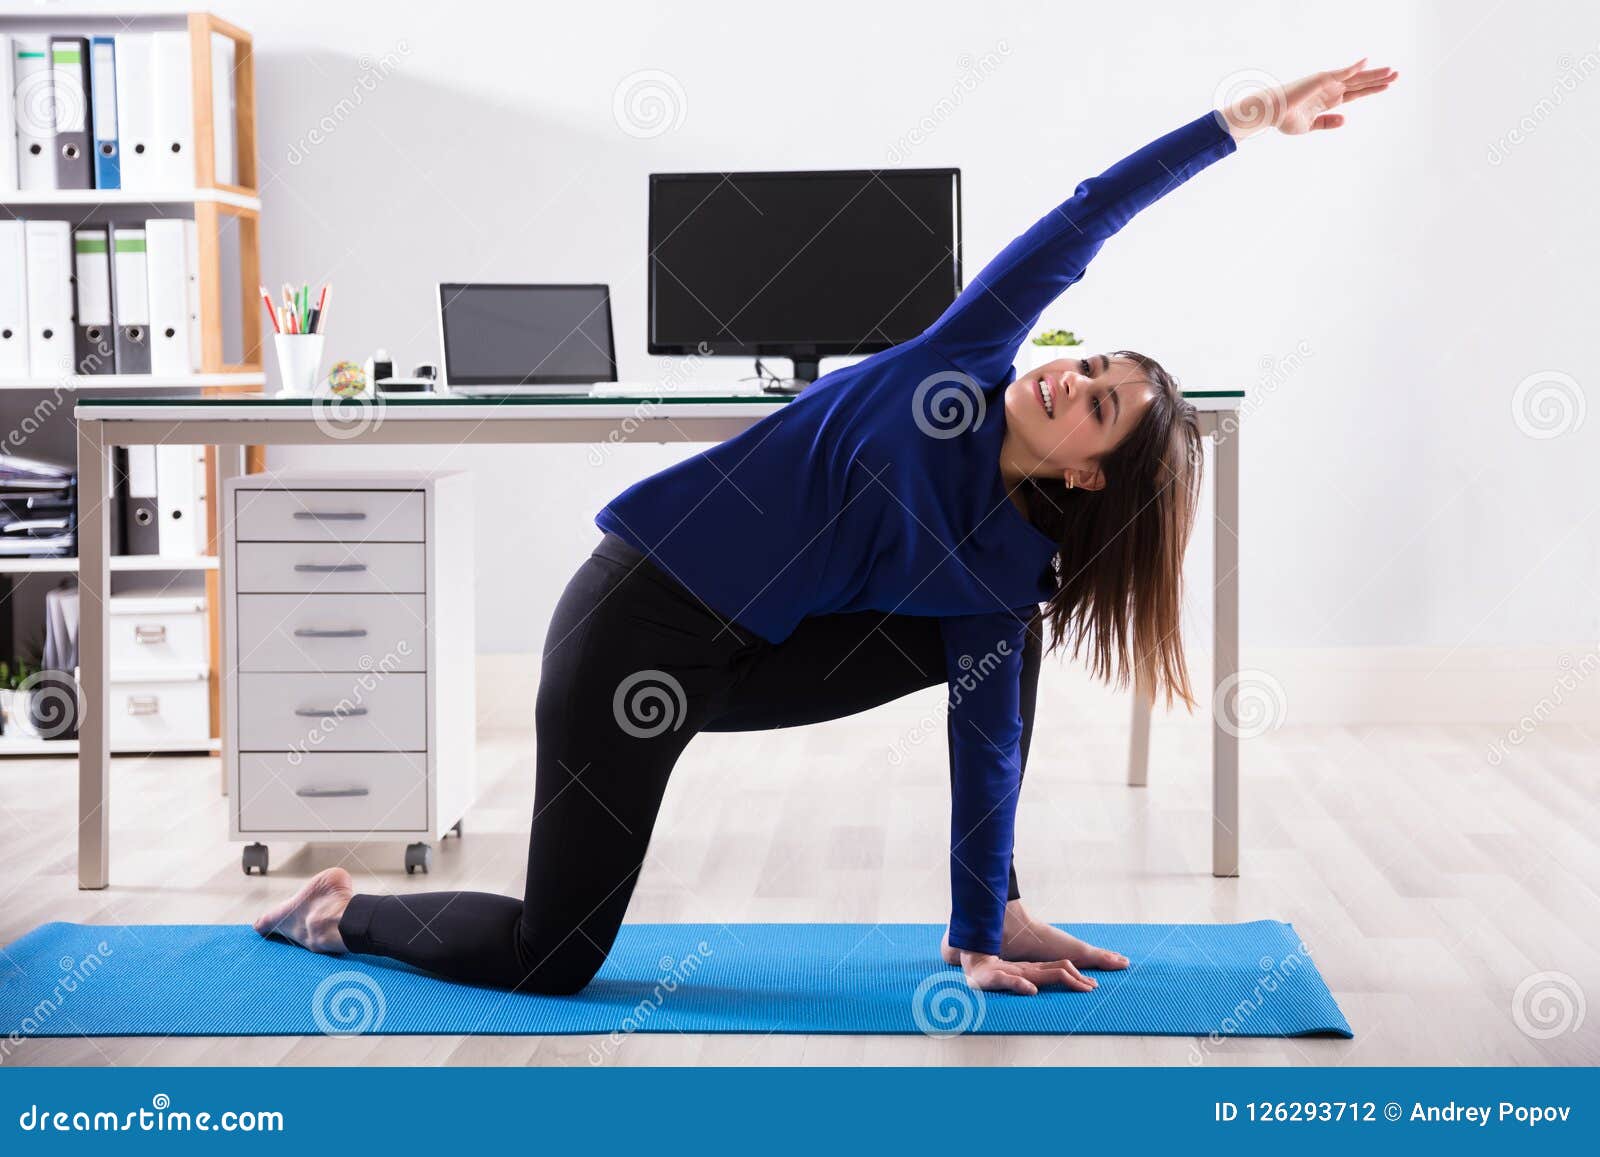 Businesswoman Doing Workout In Office Stock Photo Image Of Desk